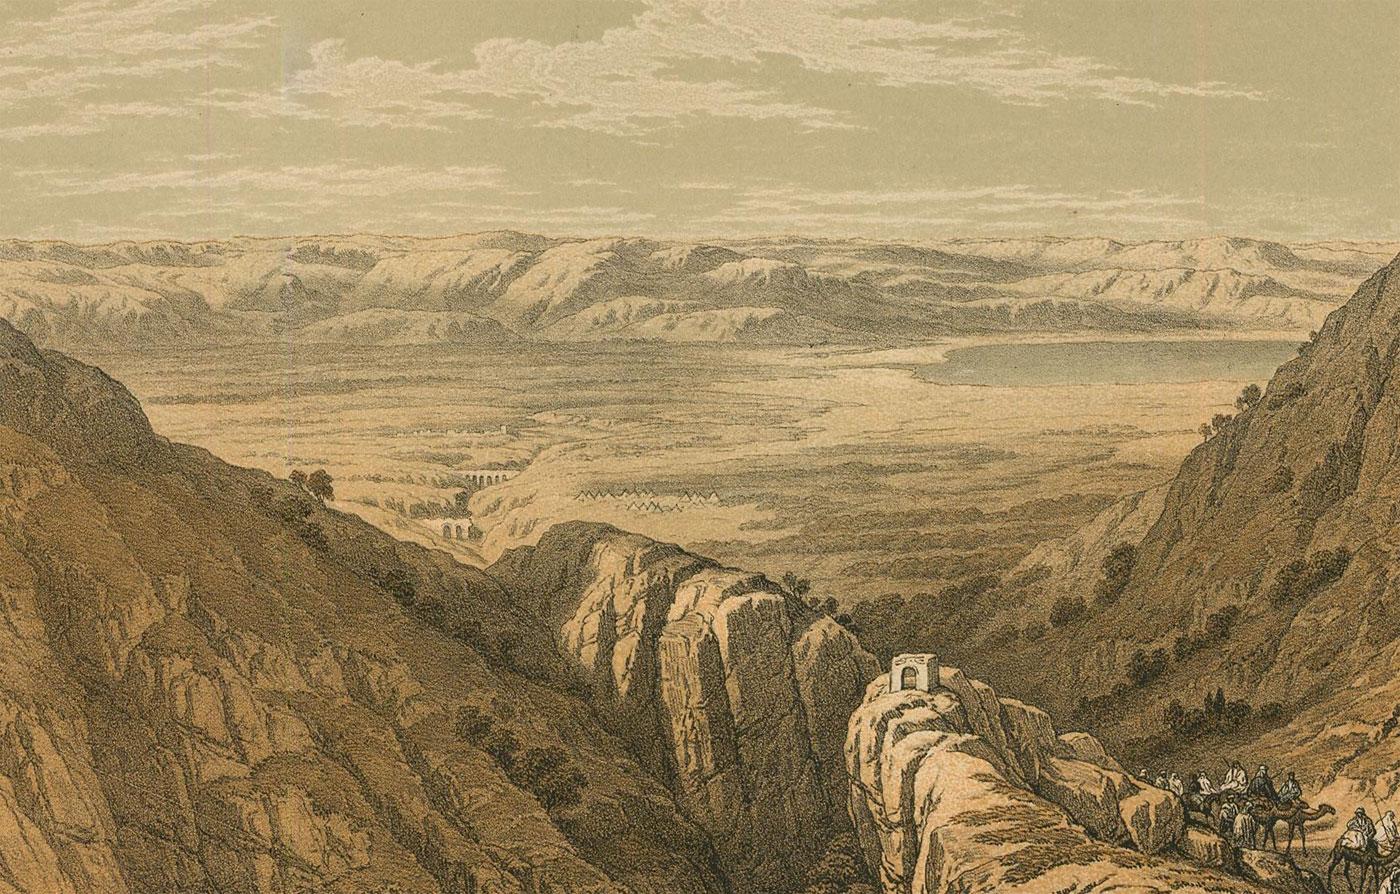 Unknown Landscape Print - David Roberts RA (1796-1864) - Lithograph, Descent Upon The Valley of Jordan